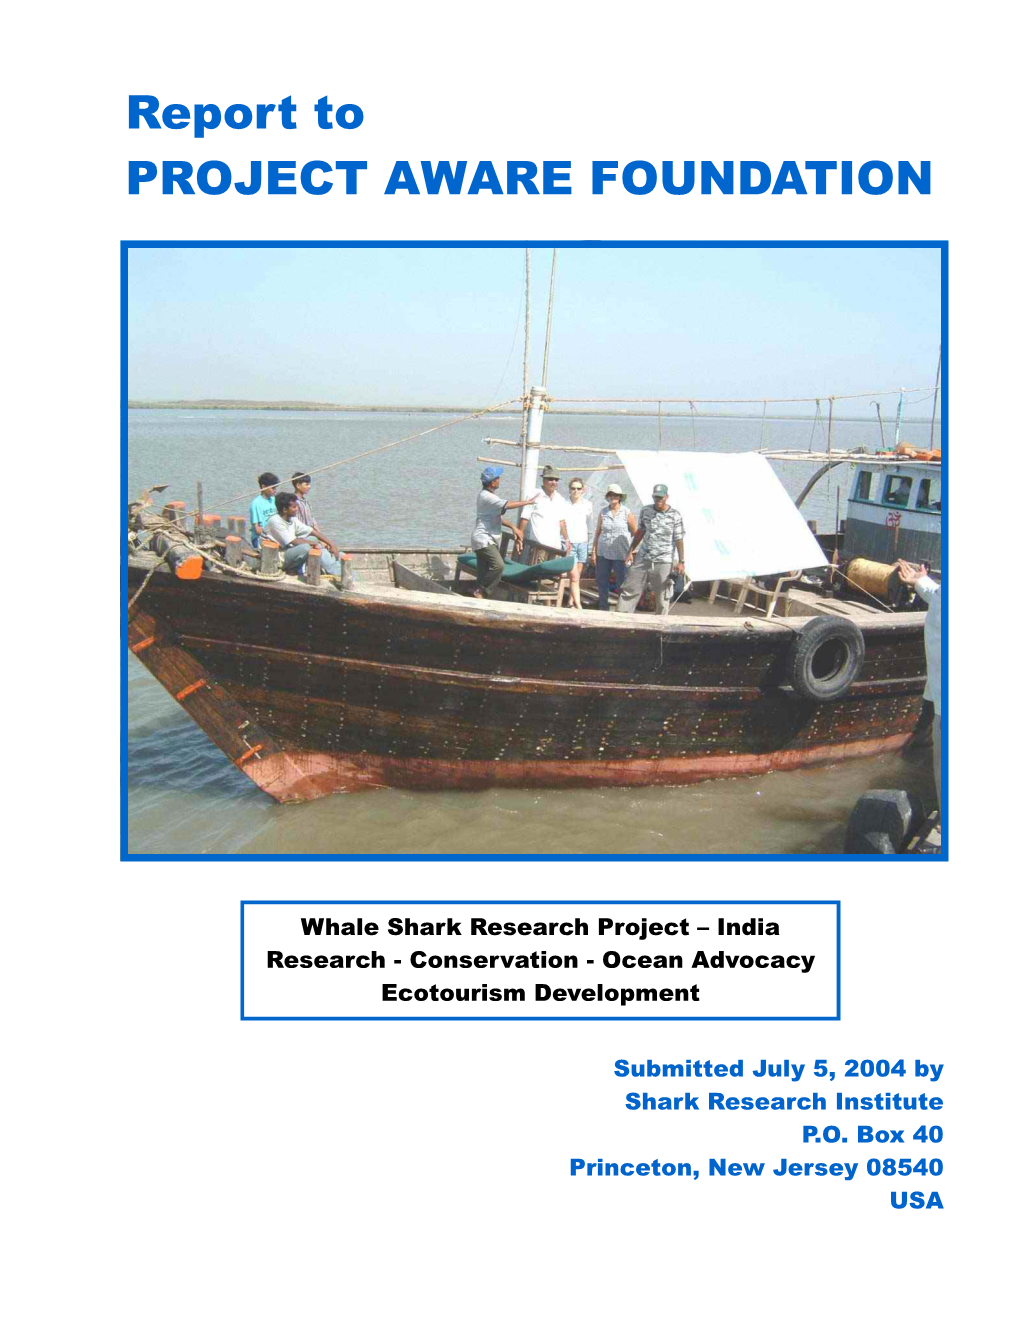 Report to PROJECT AWARE FOUNDATION